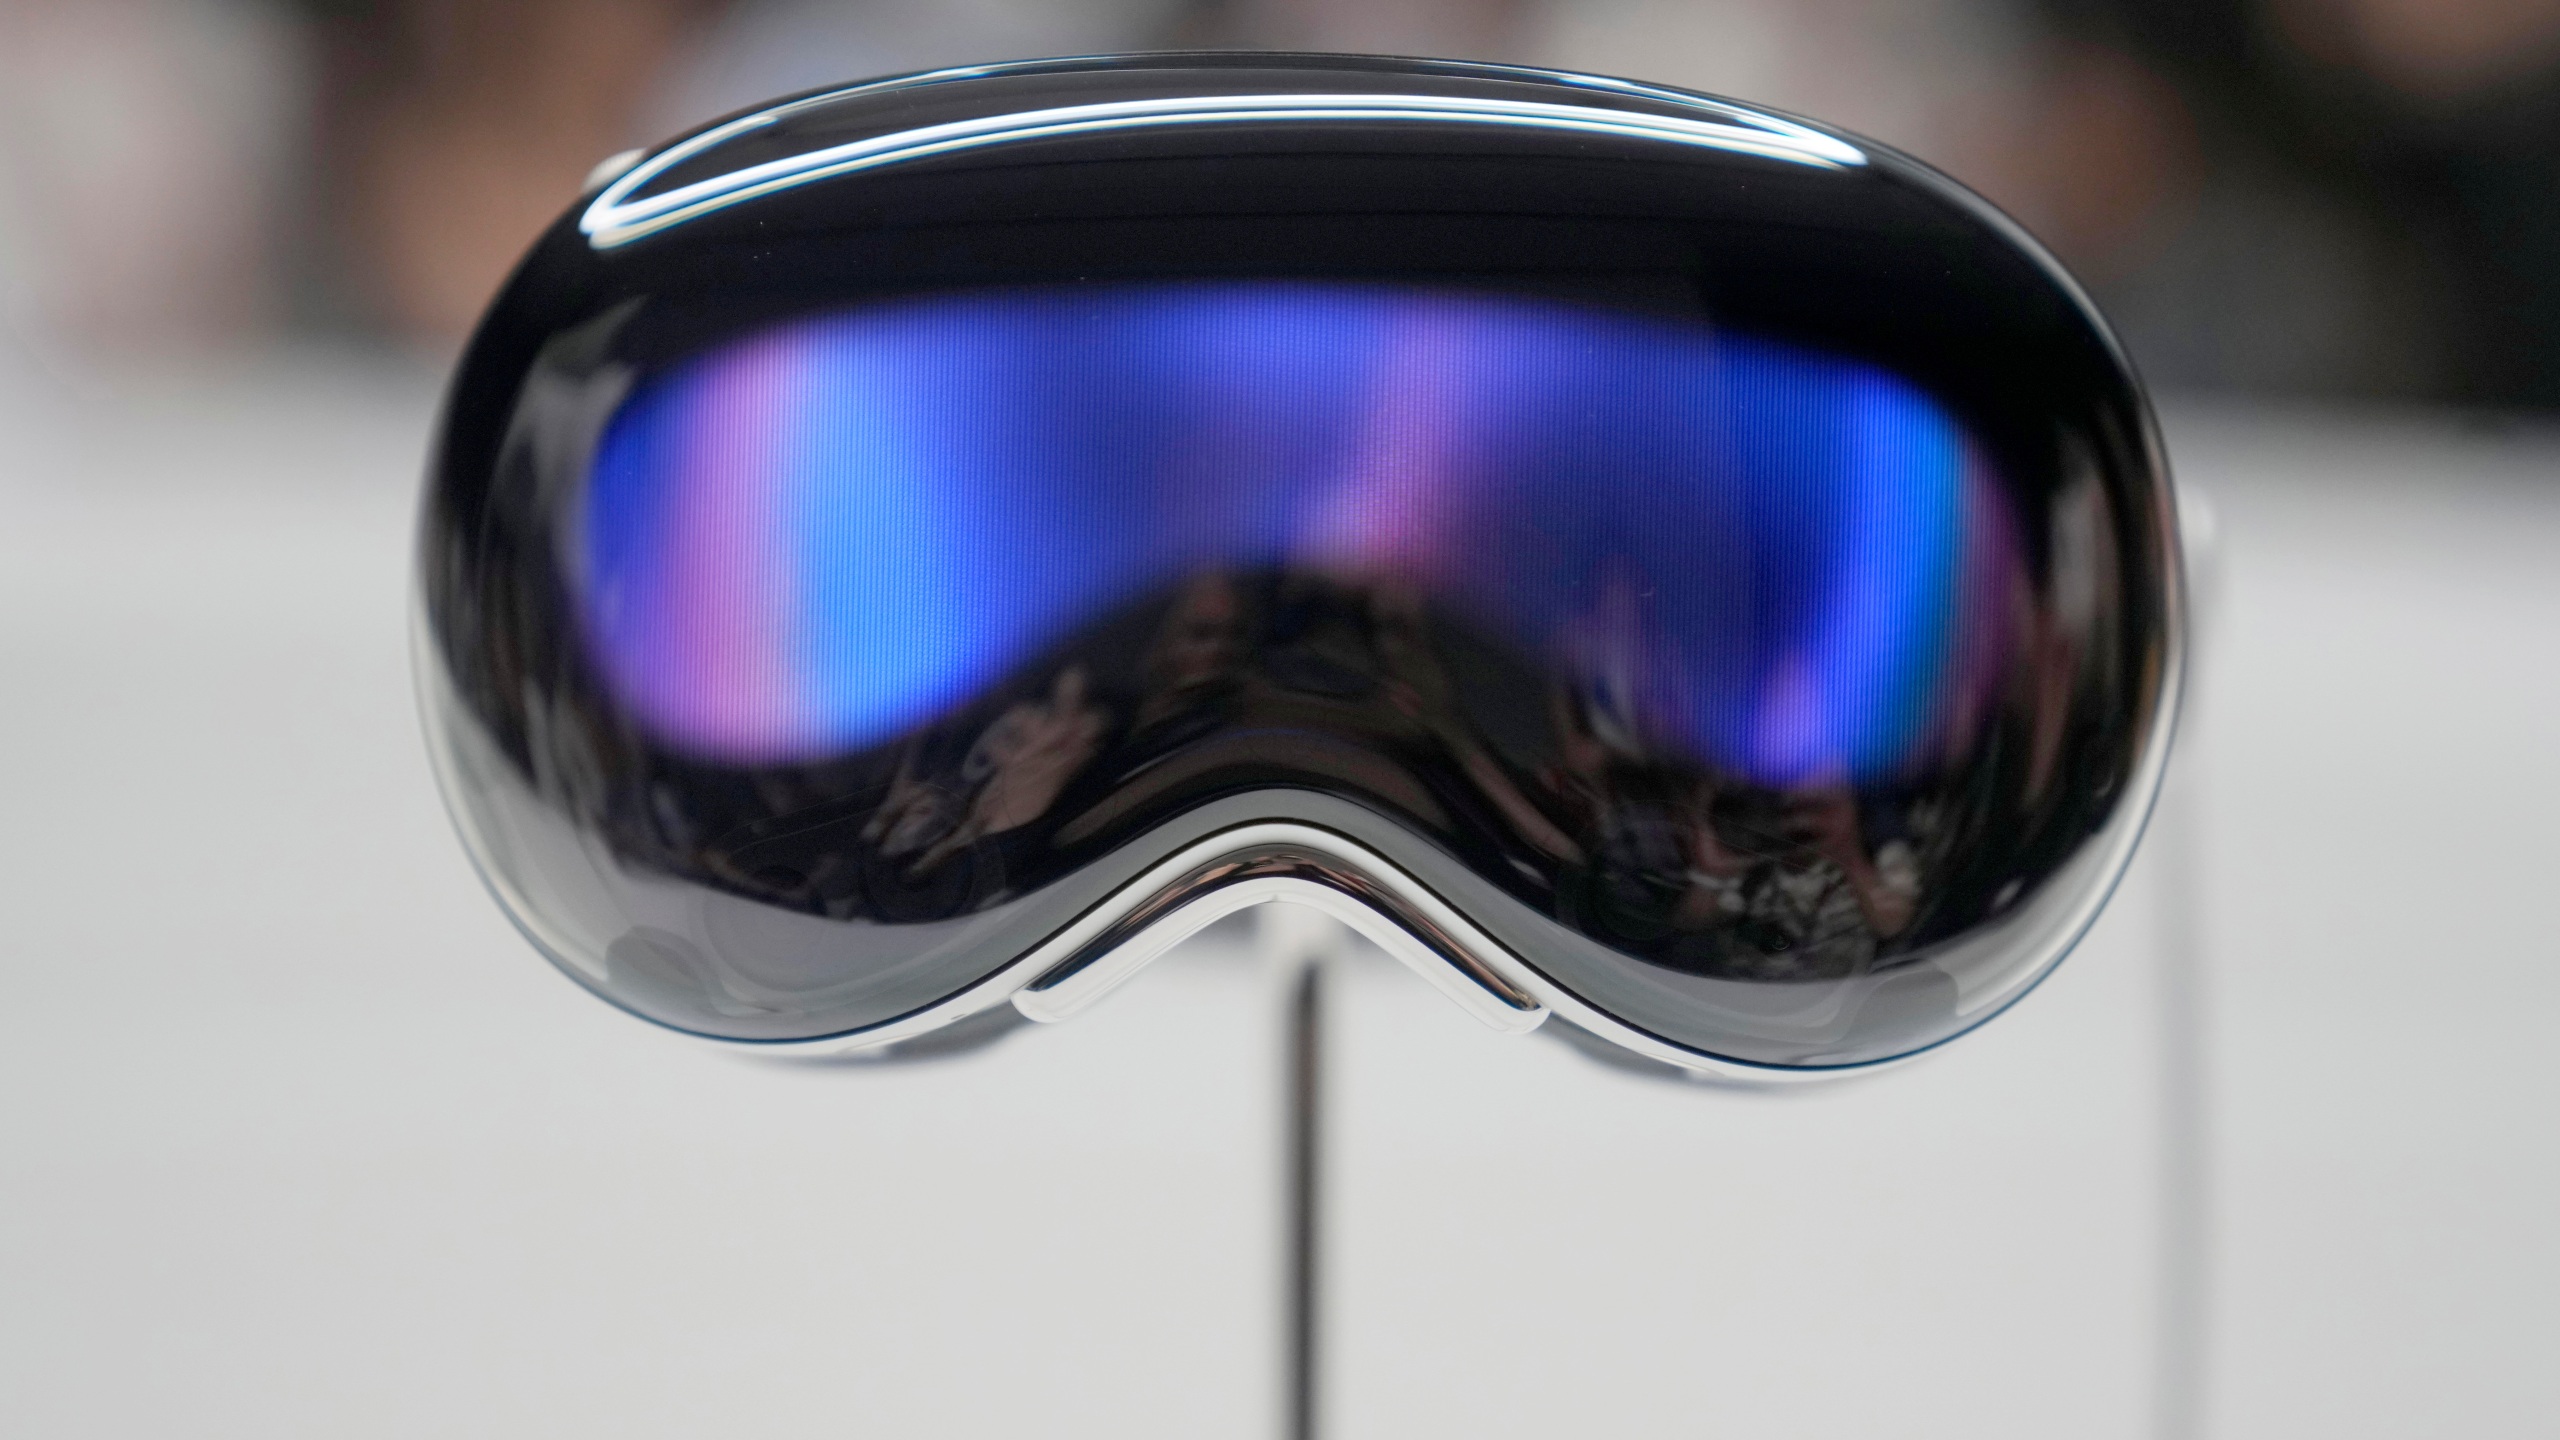 Apple's Vision Pro goggles unleash a mixed reality that could lead to more innovation and isolation